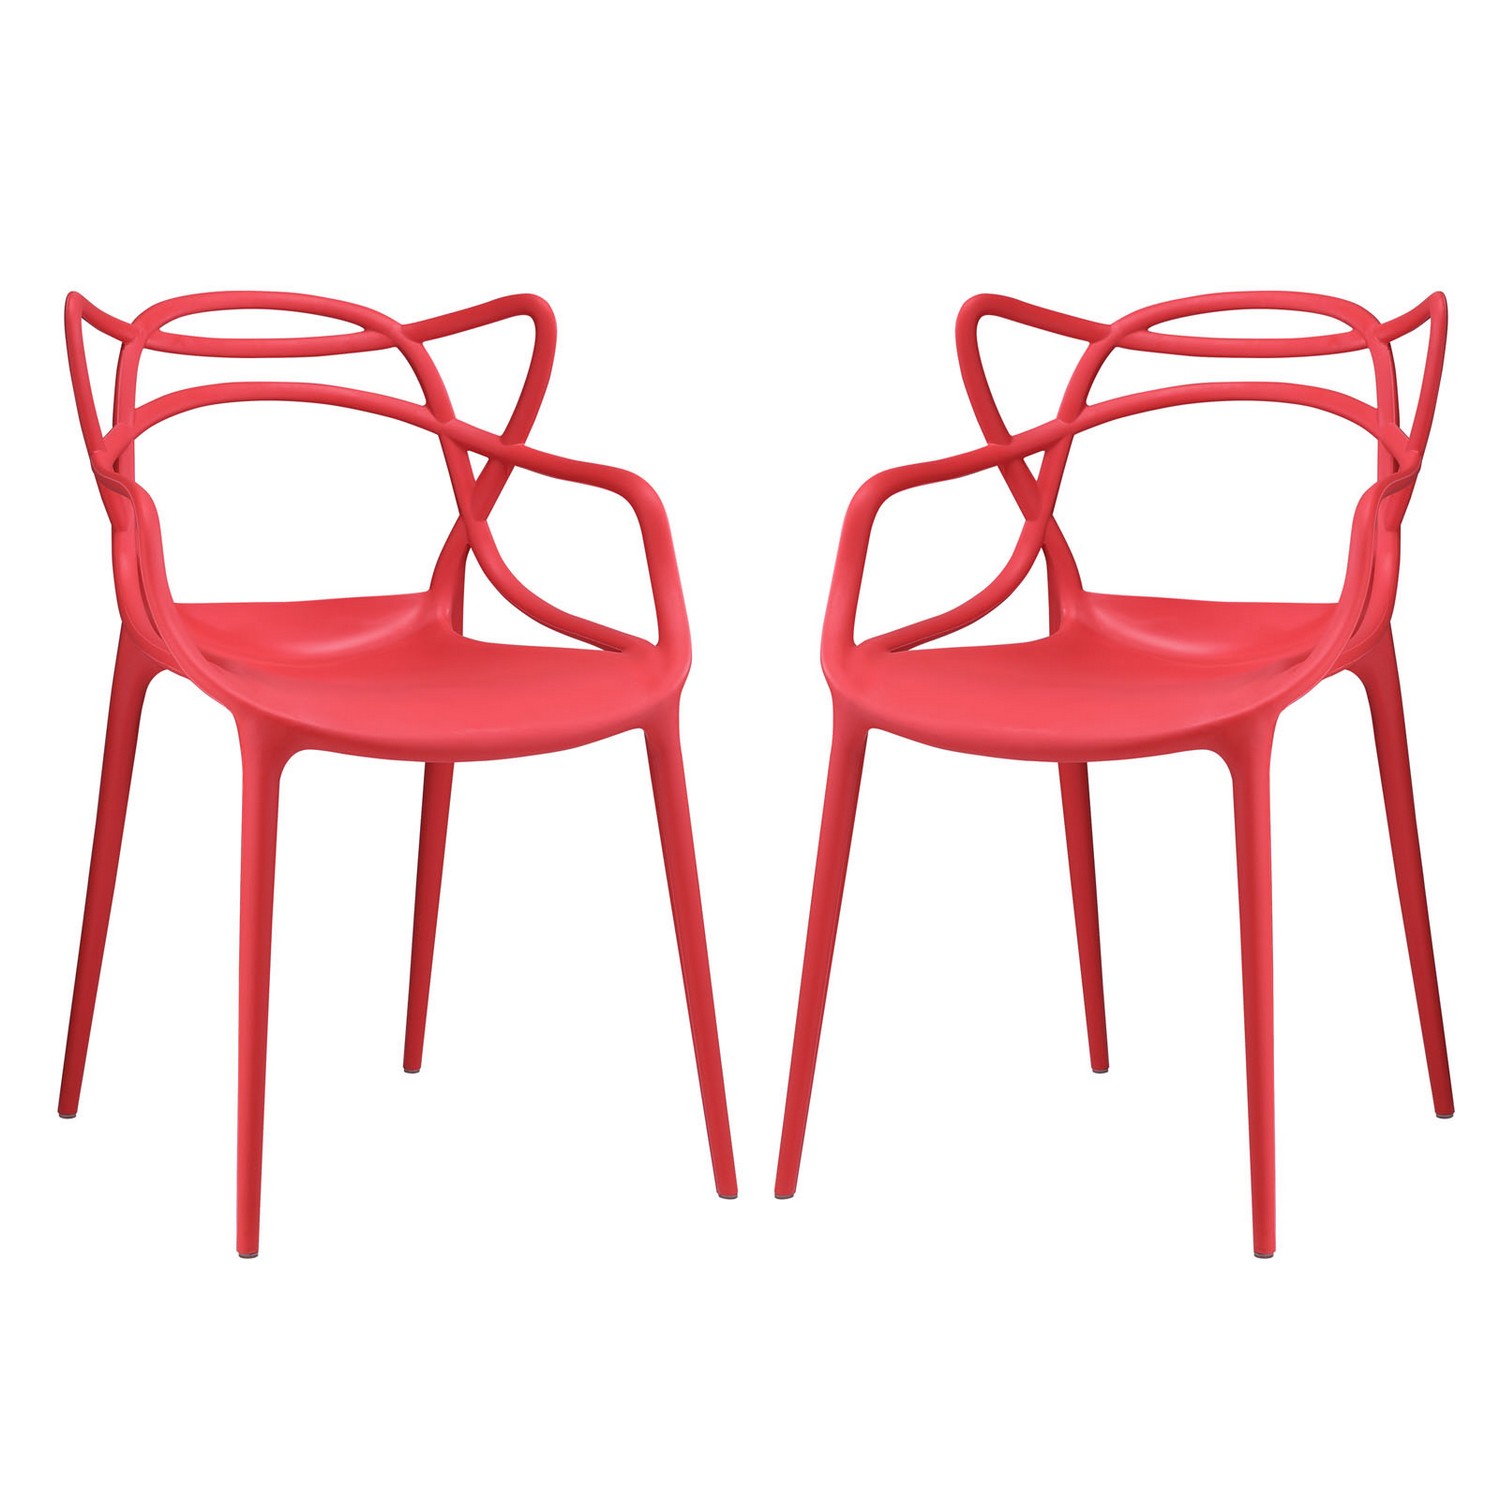 Modway Entangled Dining Chair - Set of 2 - Red